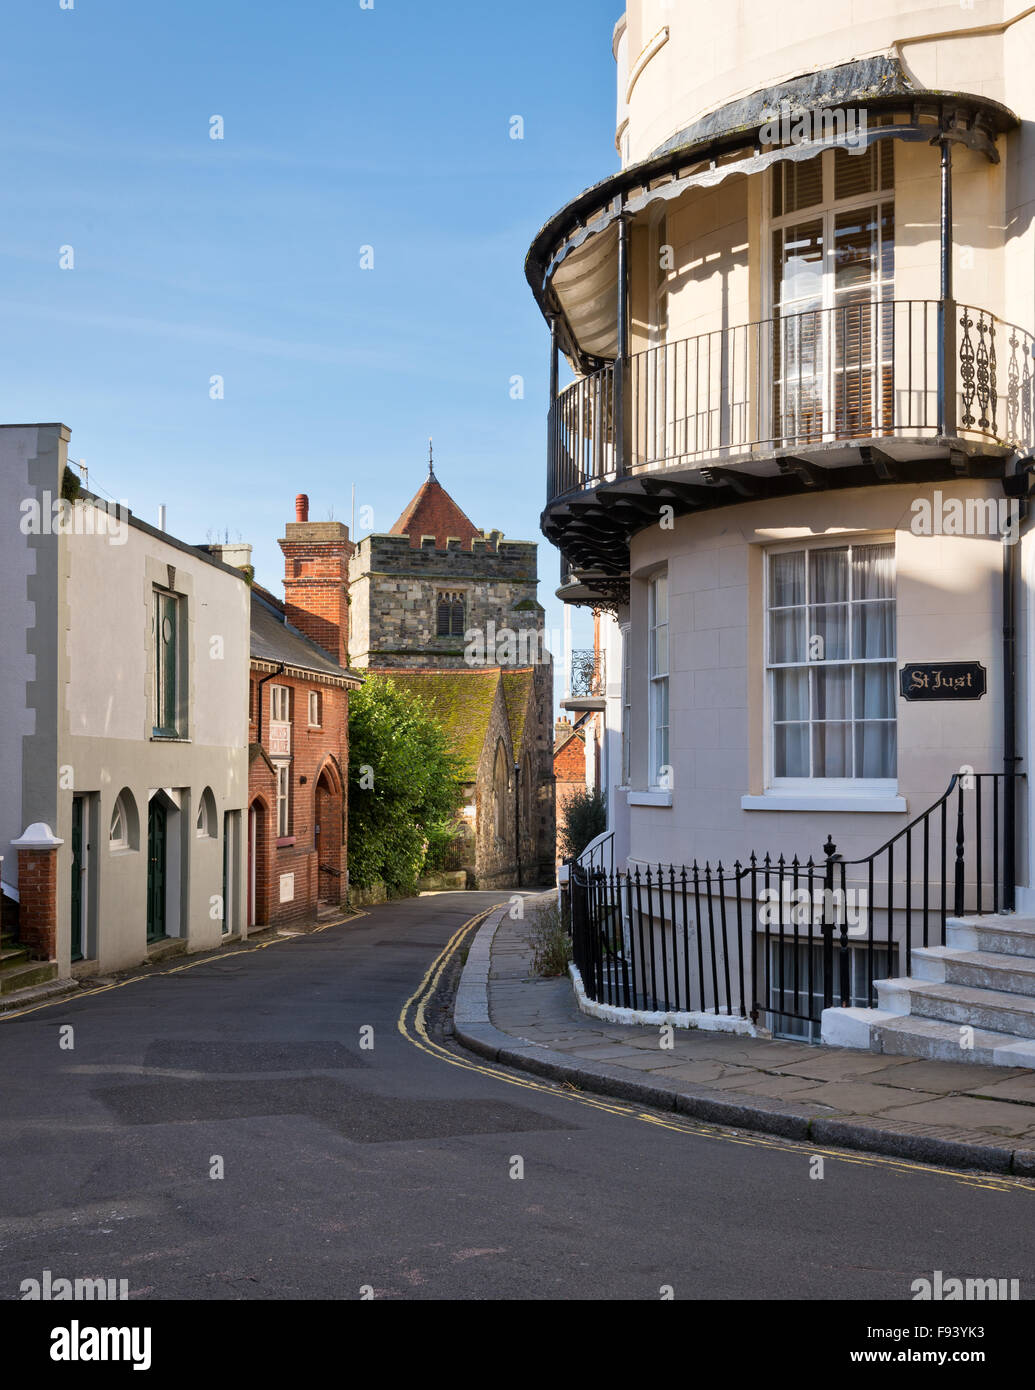 Eine Straße in Richtung St Clement Kirche in Old Town, Hastings, East Sussex. Stockfoto